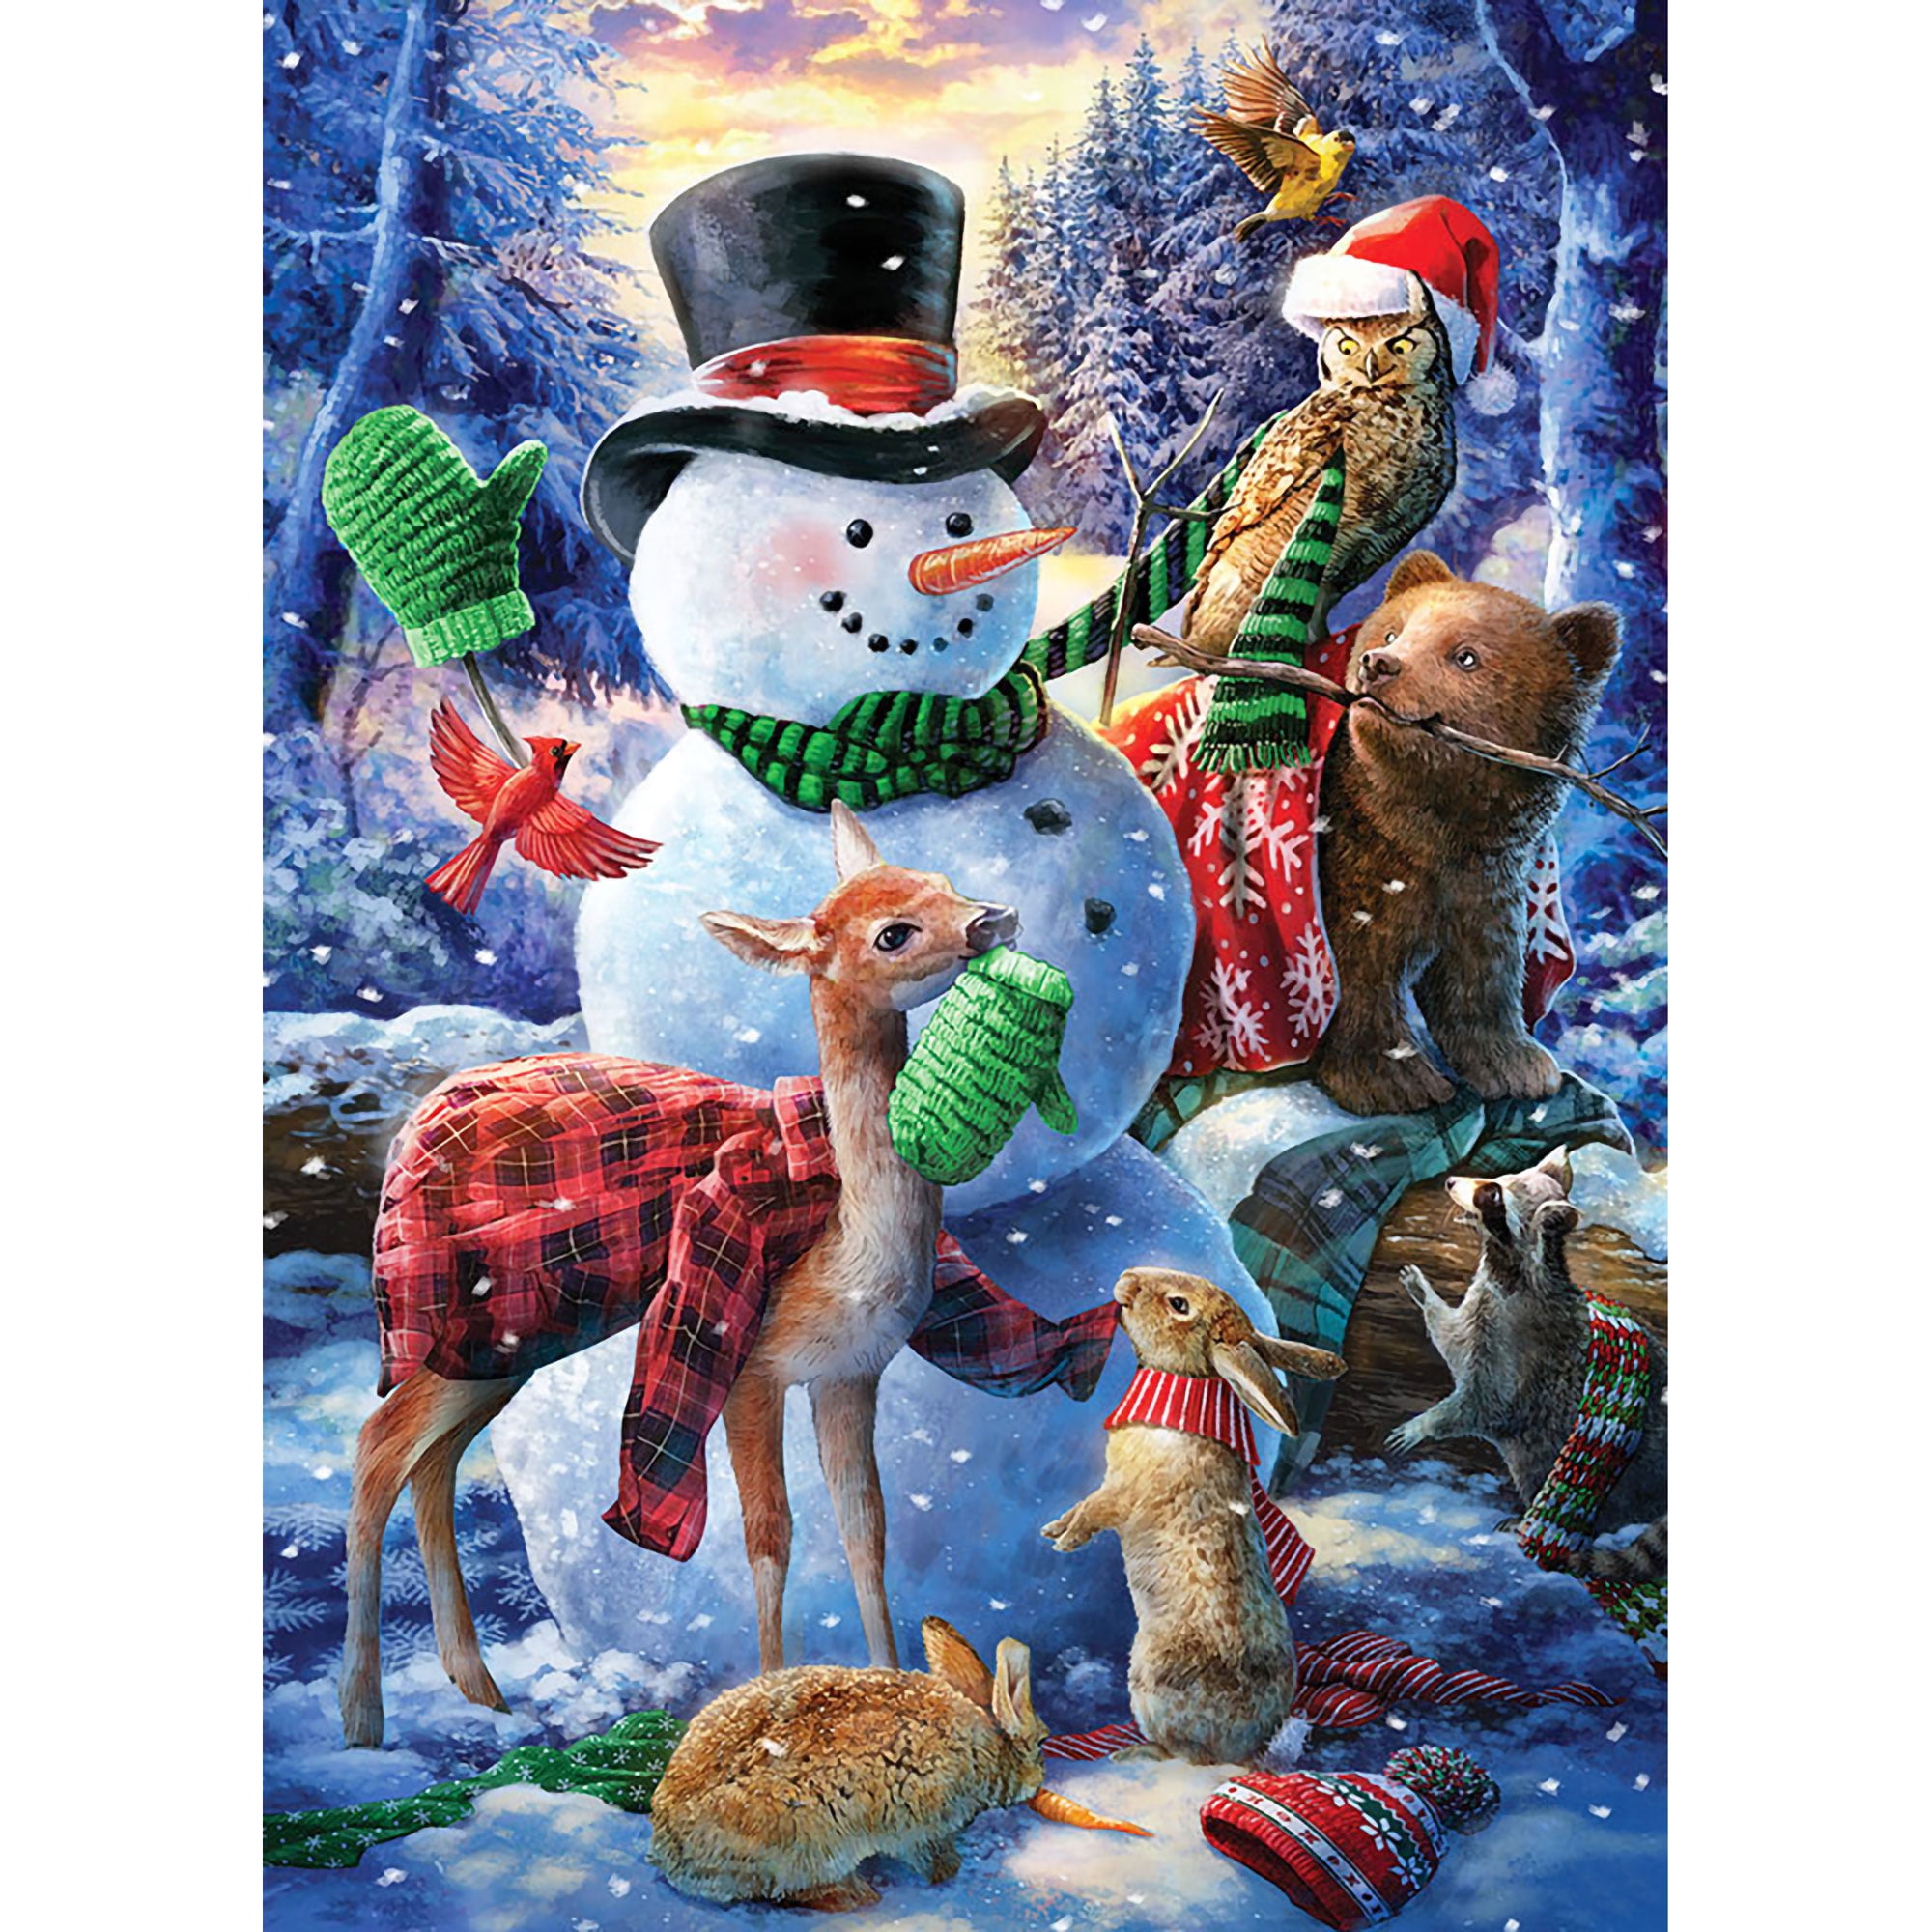 5D MERRY CHRISTMAS DIAMOND PAINTING GREETING CARD HANDMADE EMBROIDERY OPULENT